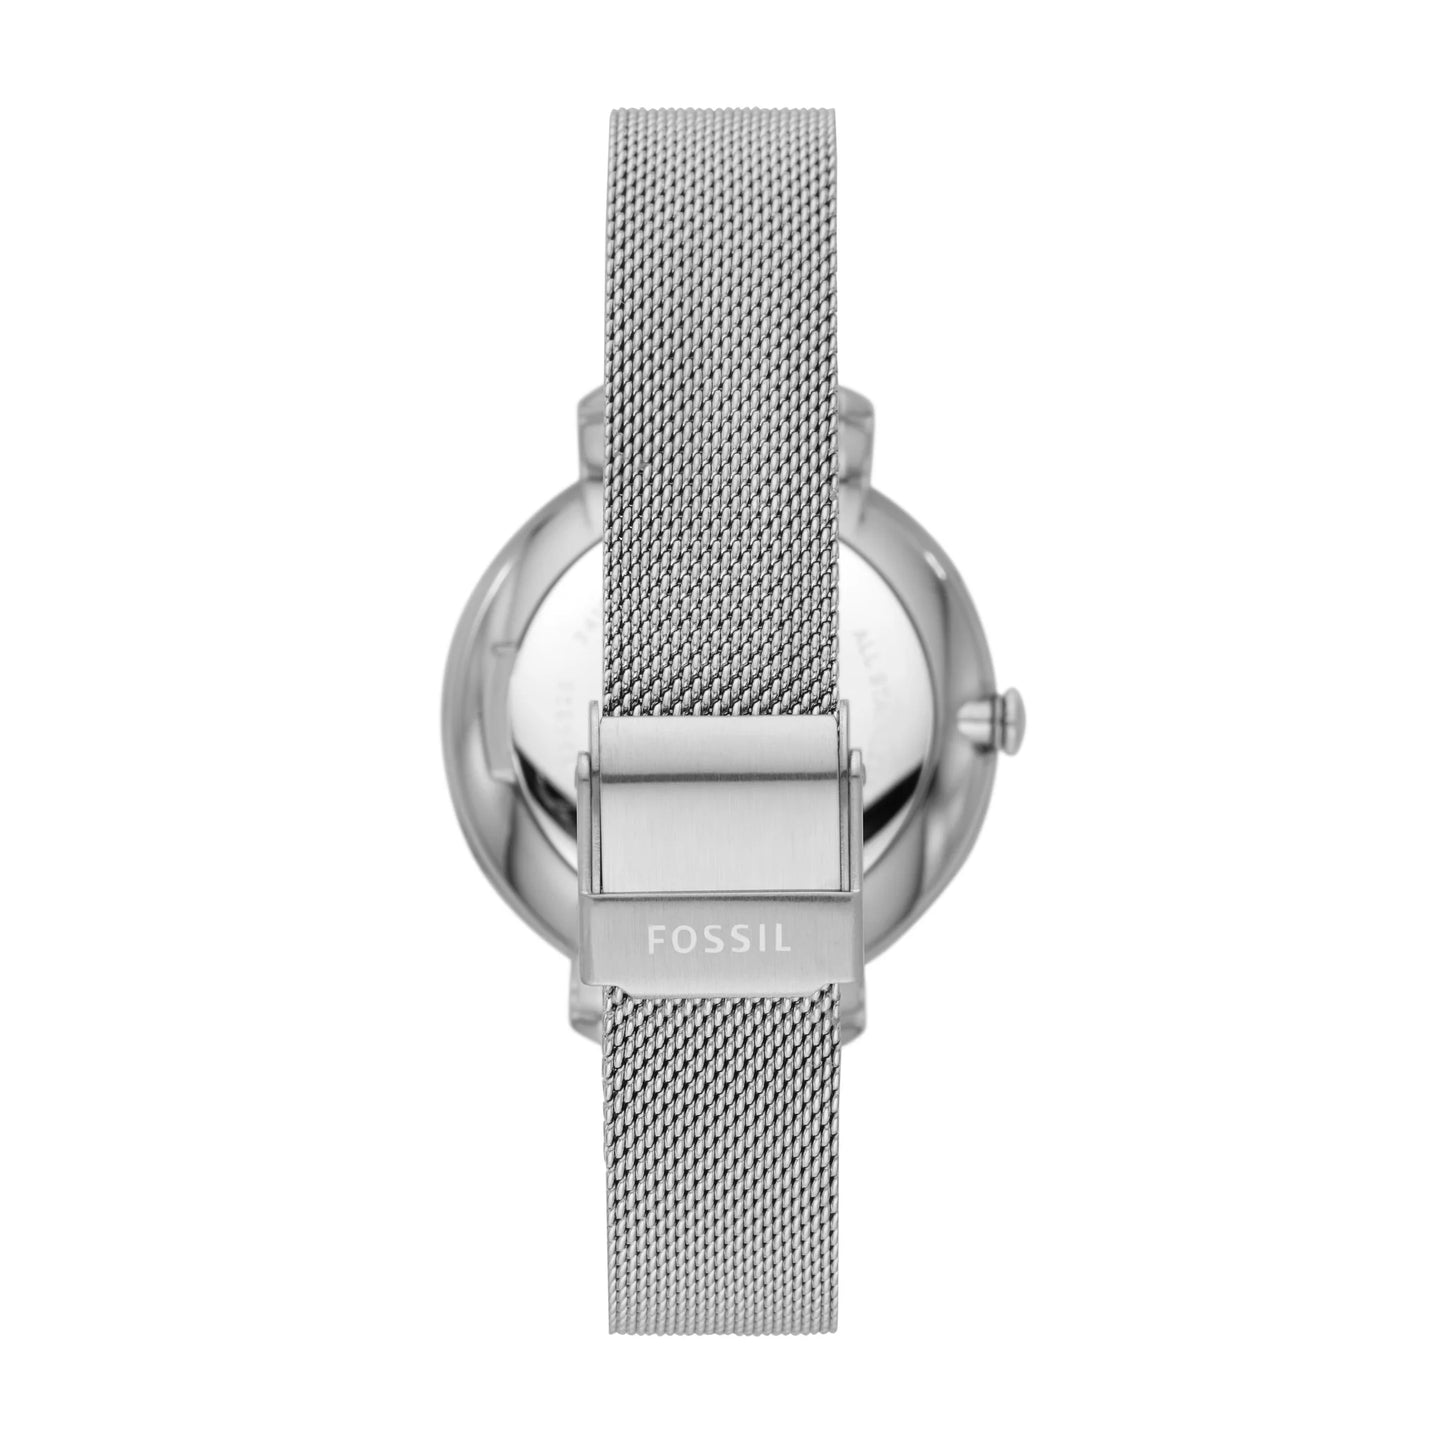 Jacqueline Three-Hand Date Stainless Steel Watch